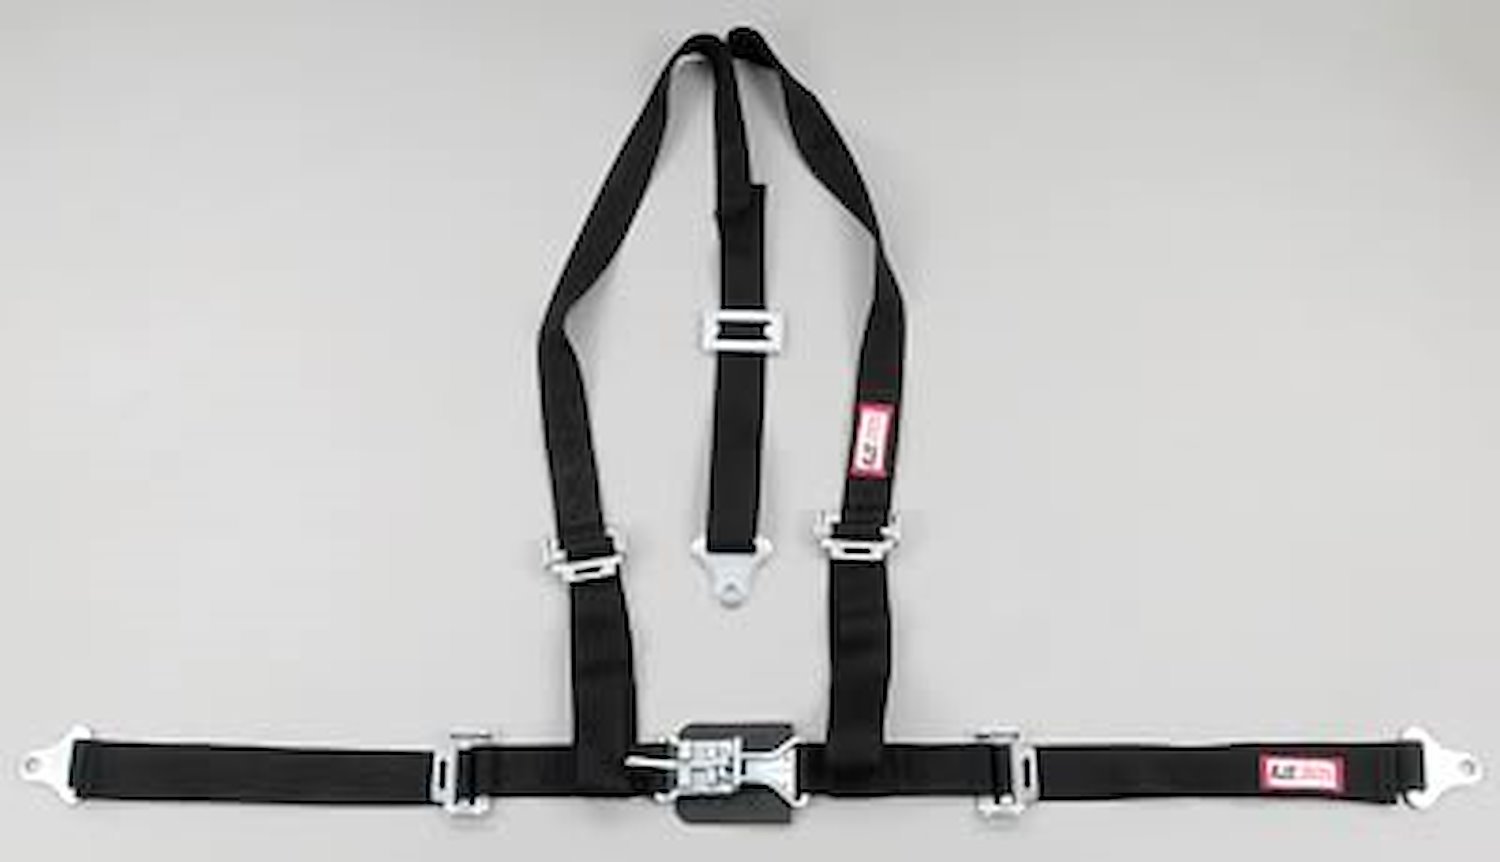 NON-SFI L&L HARNESS 2 PULL UP Lap Belt w/Adjuster SNAP 2 S.H. Individual FLOOR MOUNT w/STERNUM STRAP WRAP/BOLT GRAY